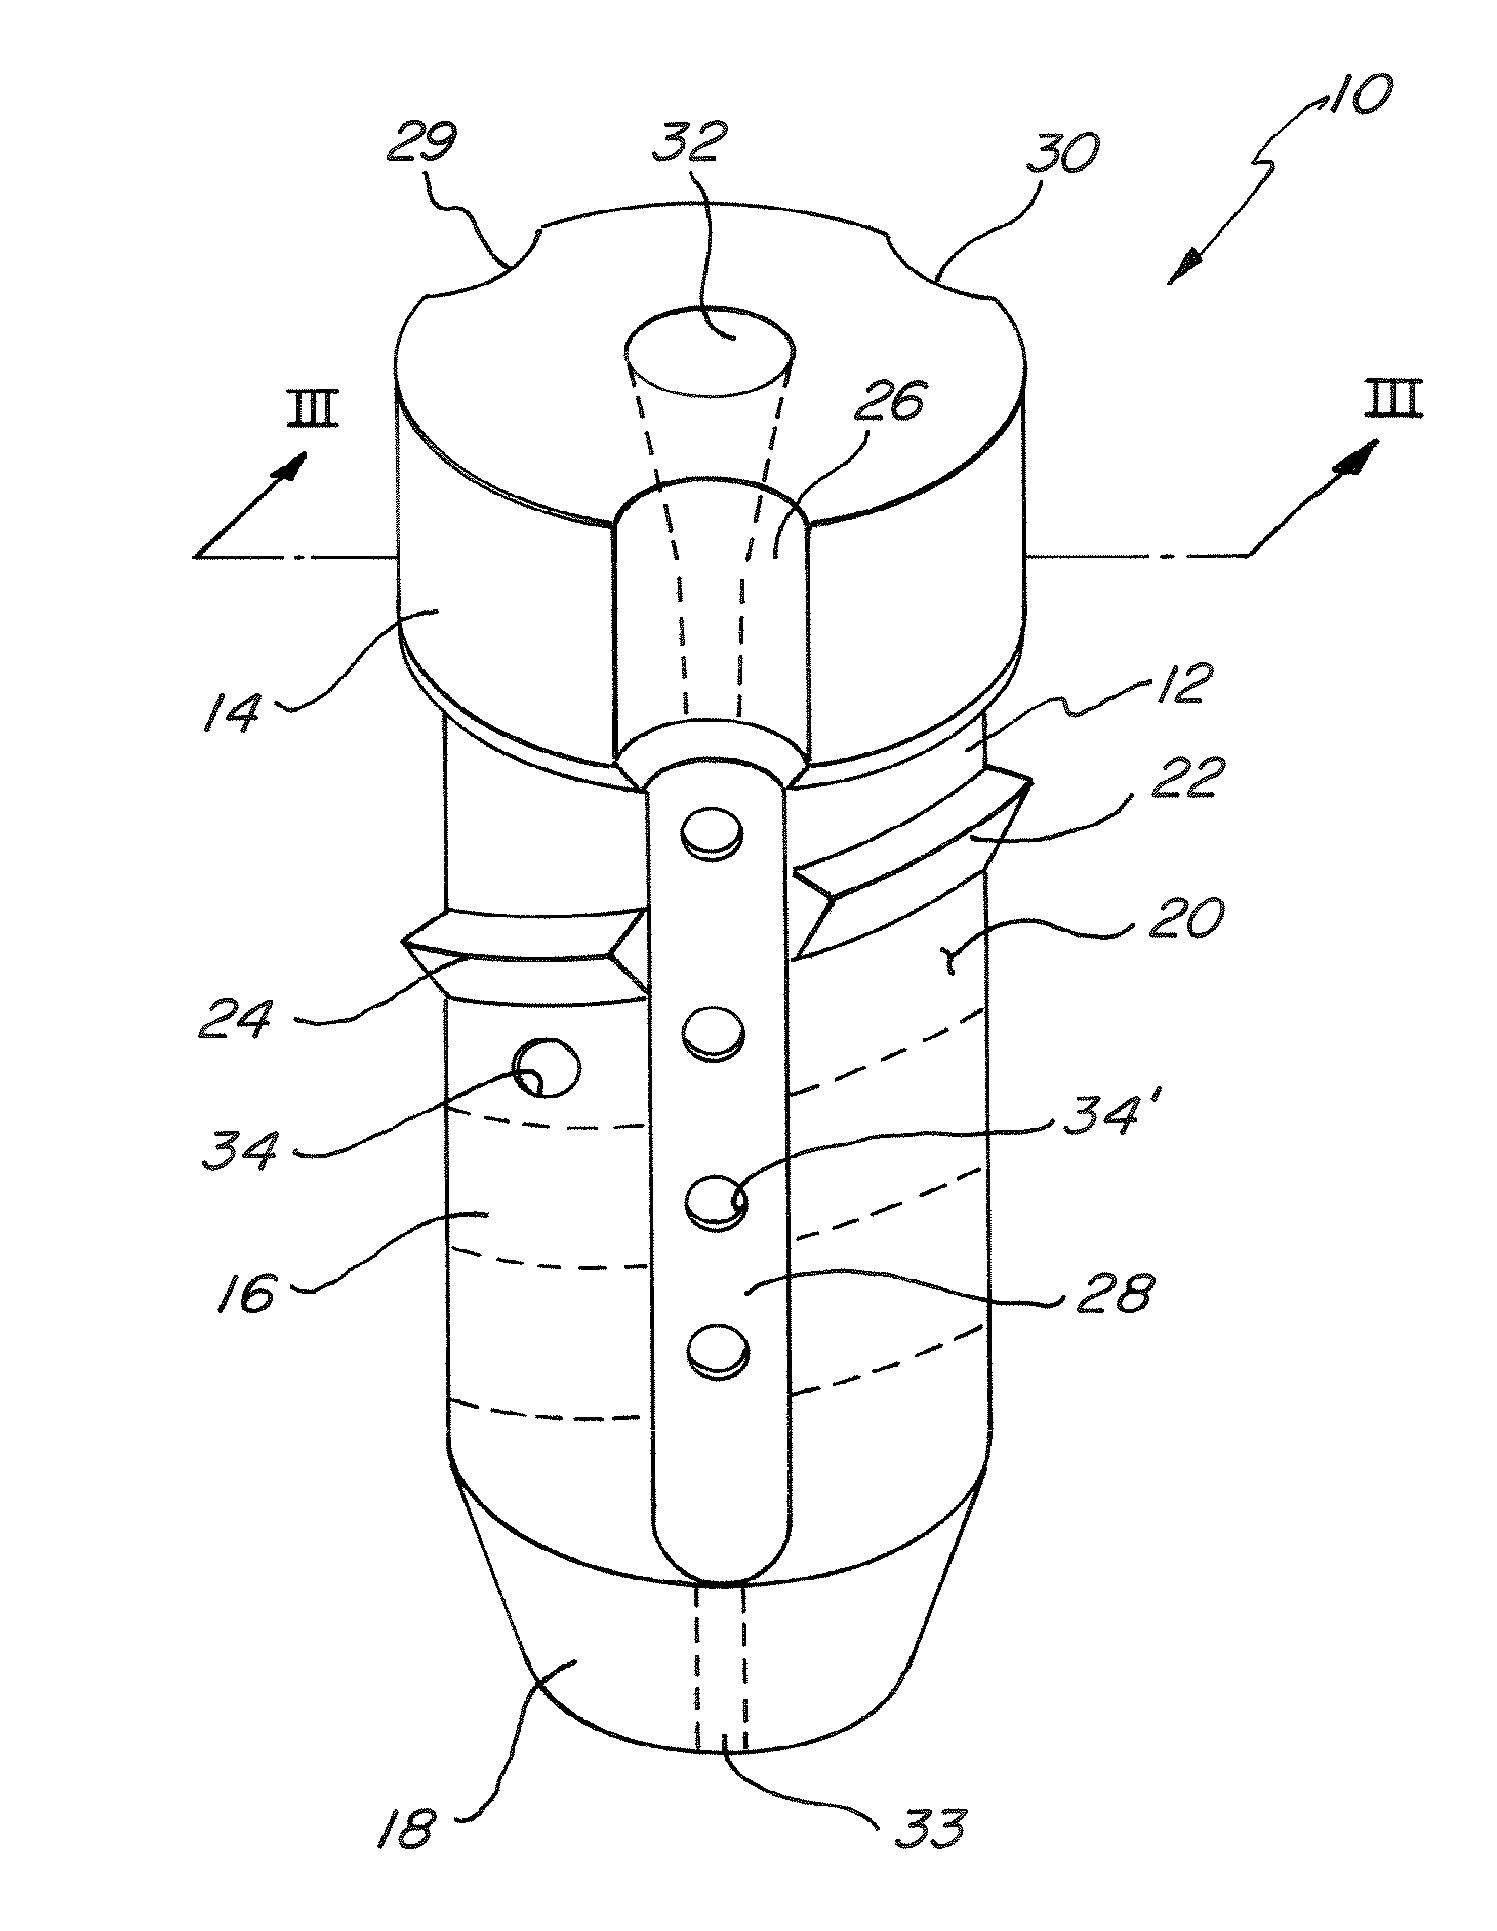 Biodegradable interference screw and tool for attaching a transplant to a bone